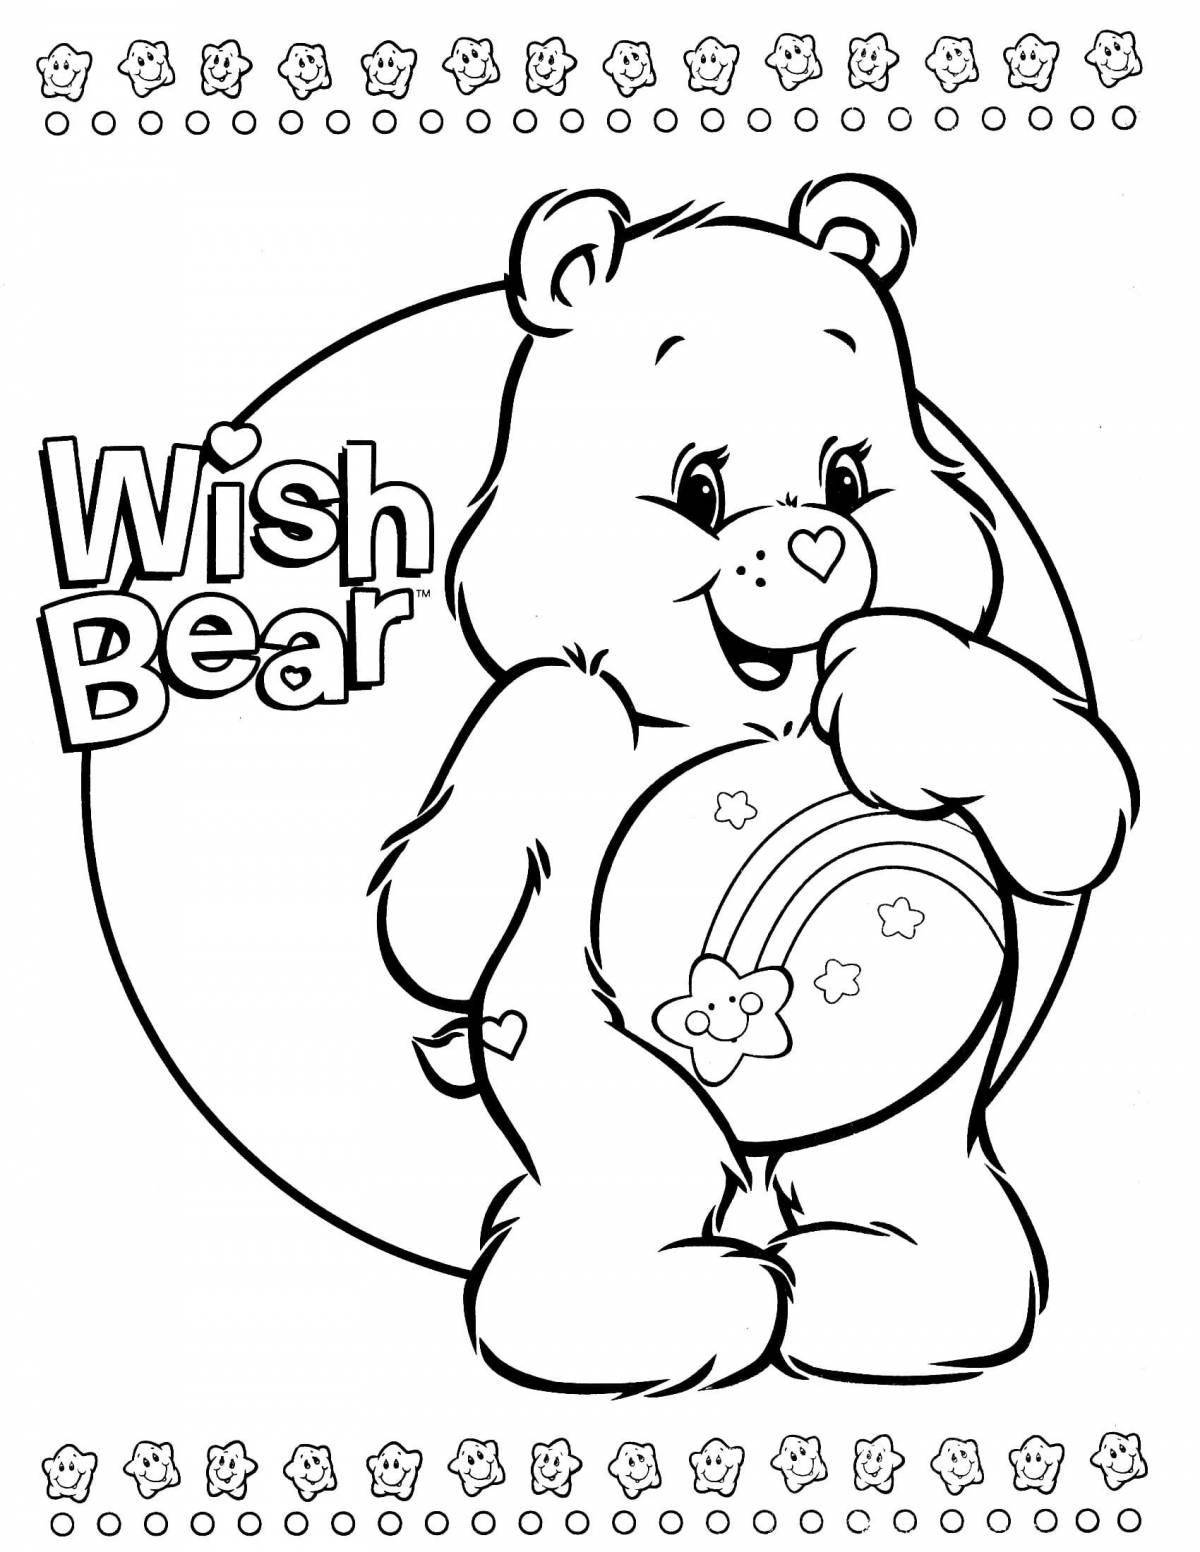 Glowing bear and rabbit coloring page